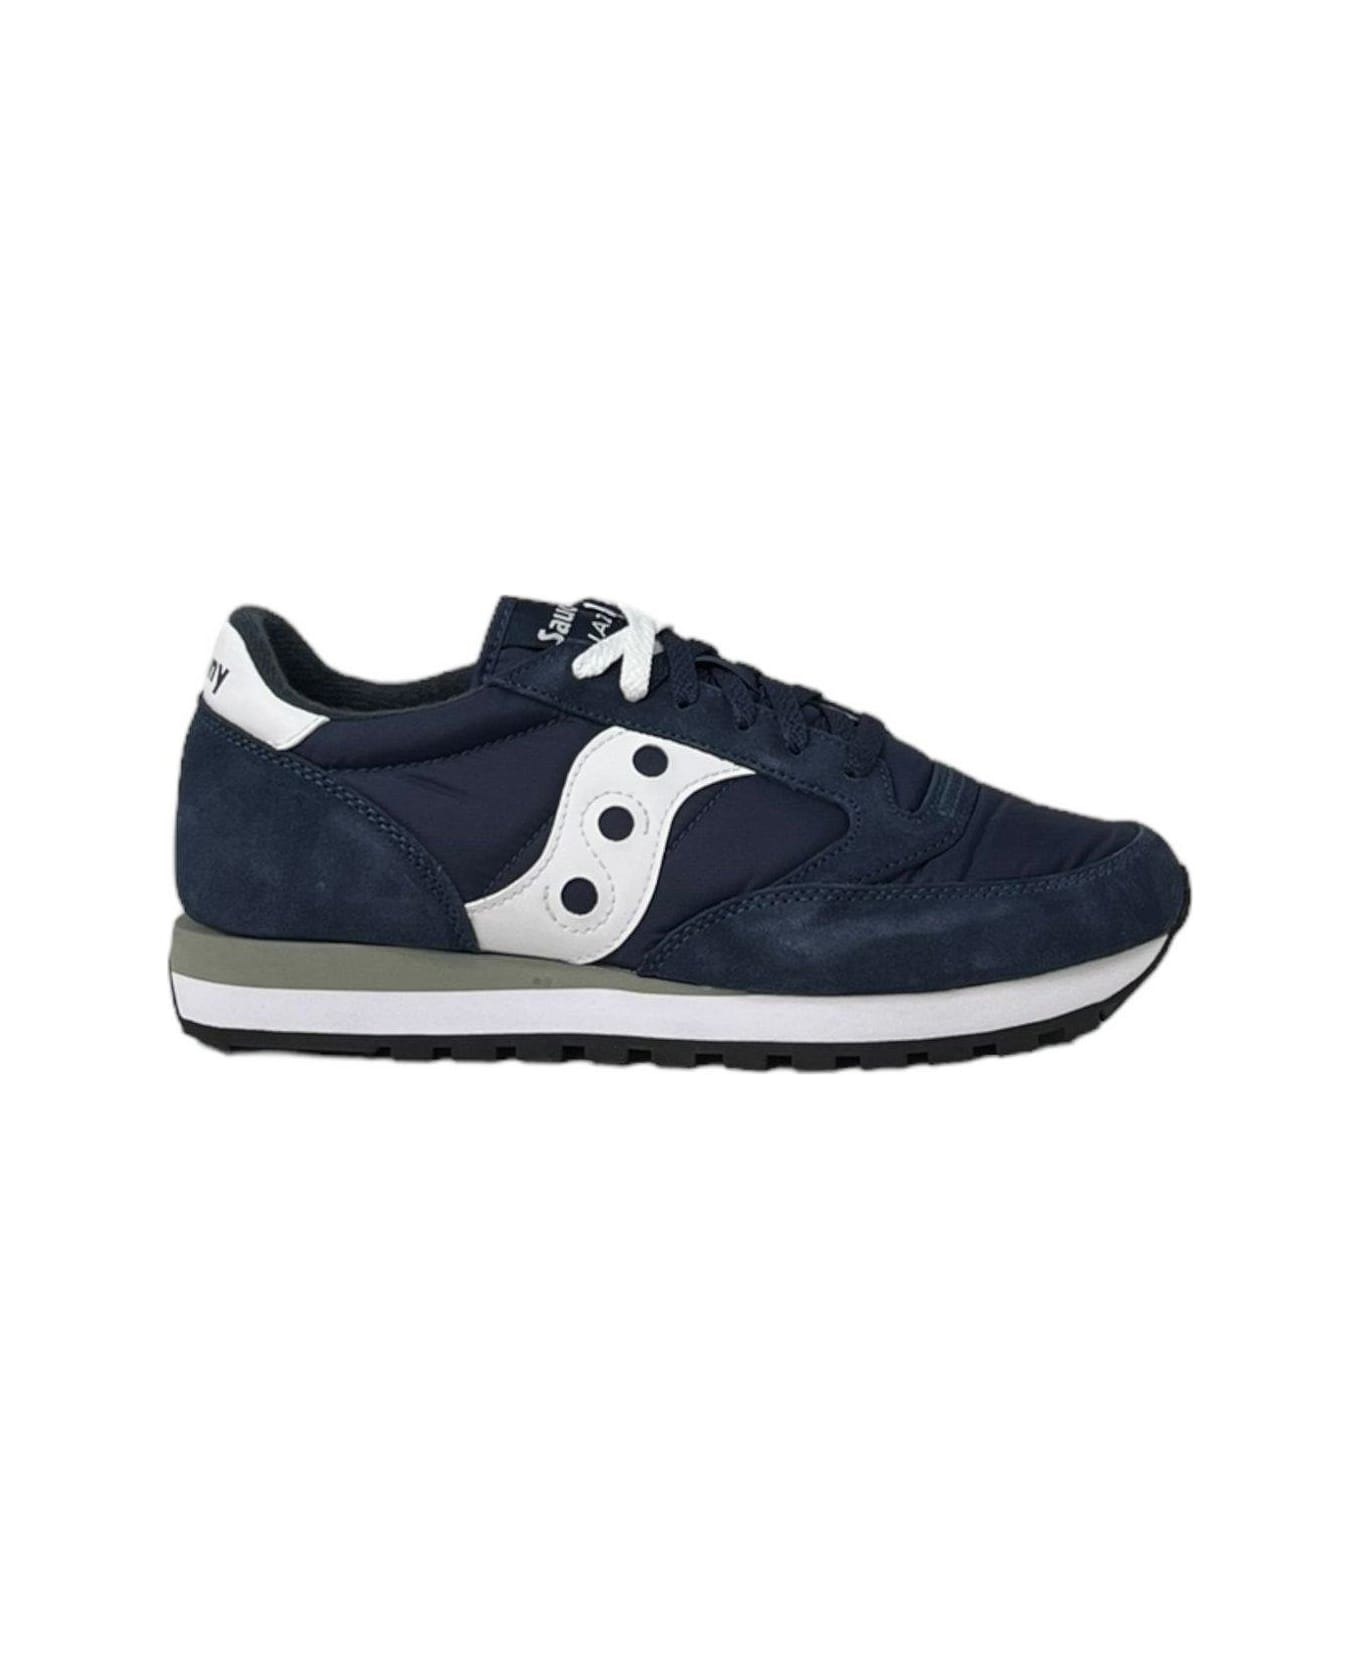 Saucony Jazz Original Lace-up Sneakers - Navy/white